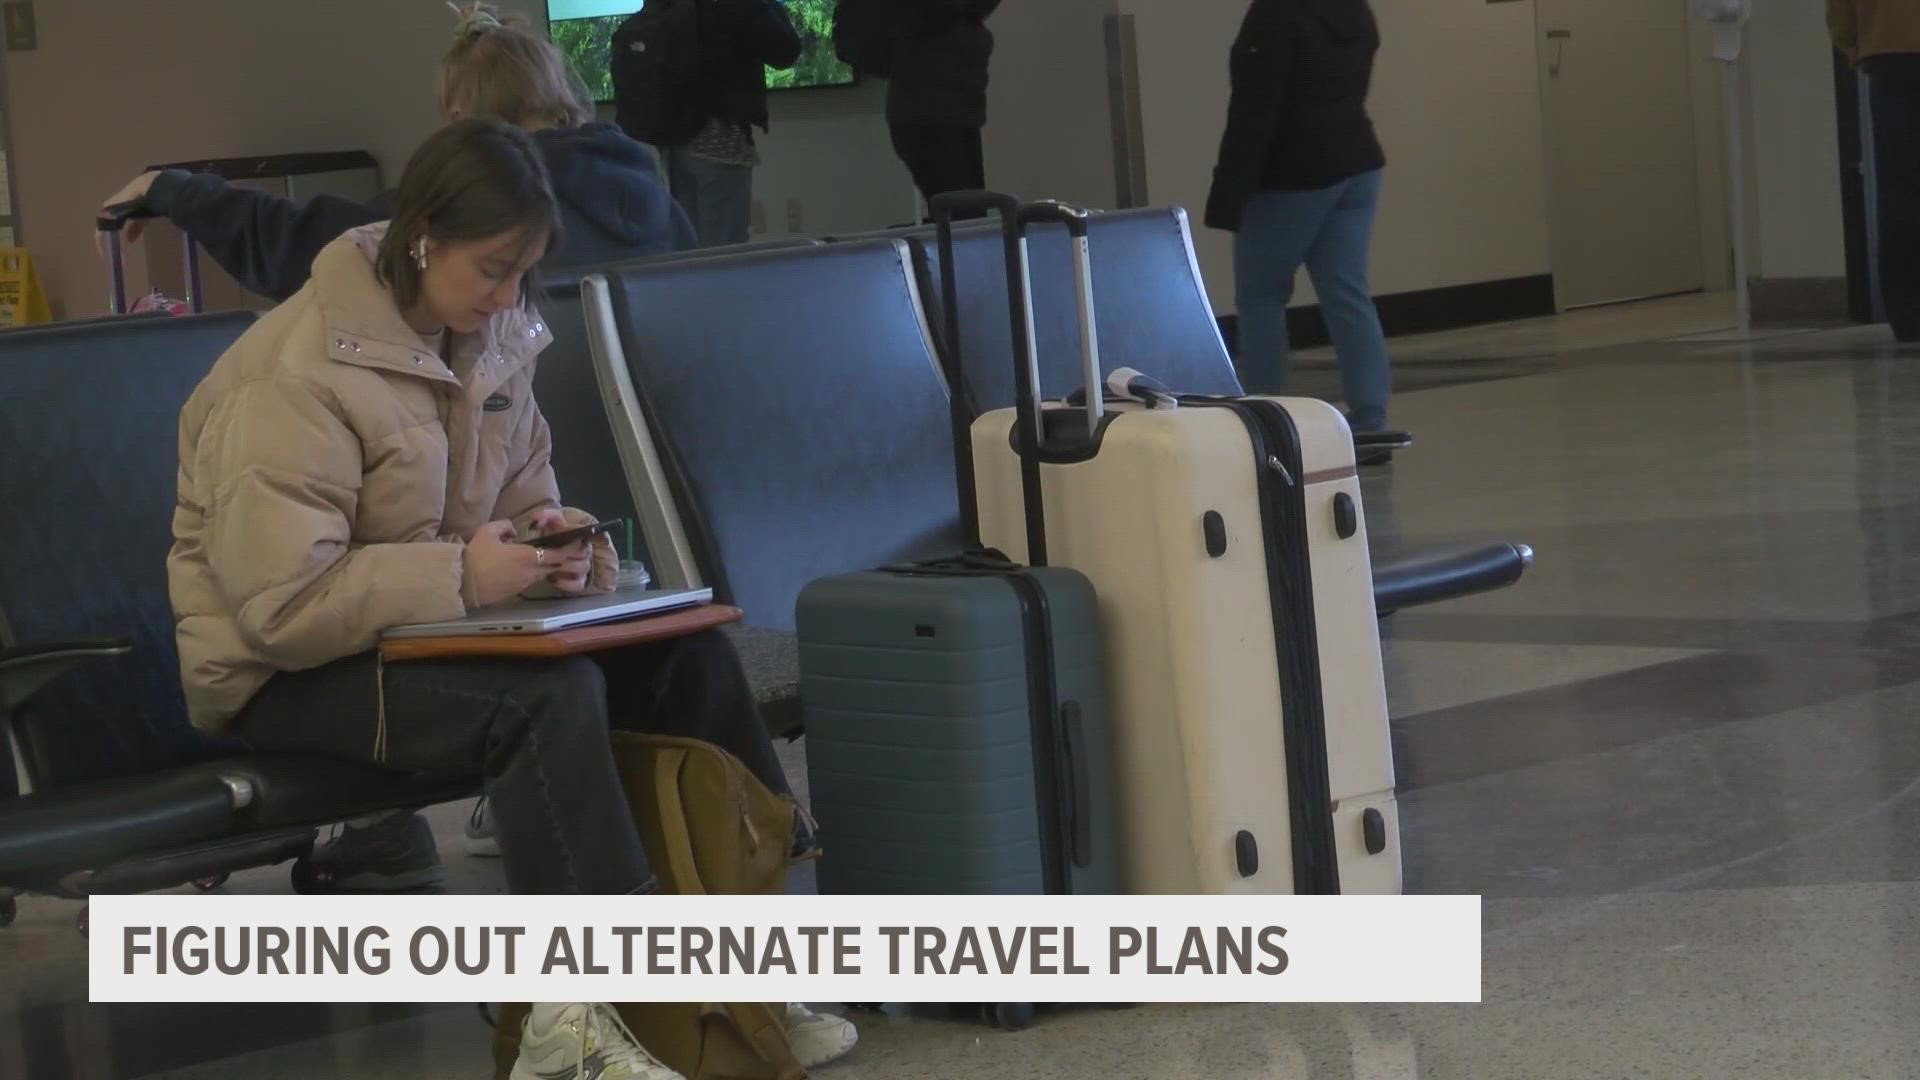 Eight flights into or out of Des Moines International Airport were cancelled on Wednesday.